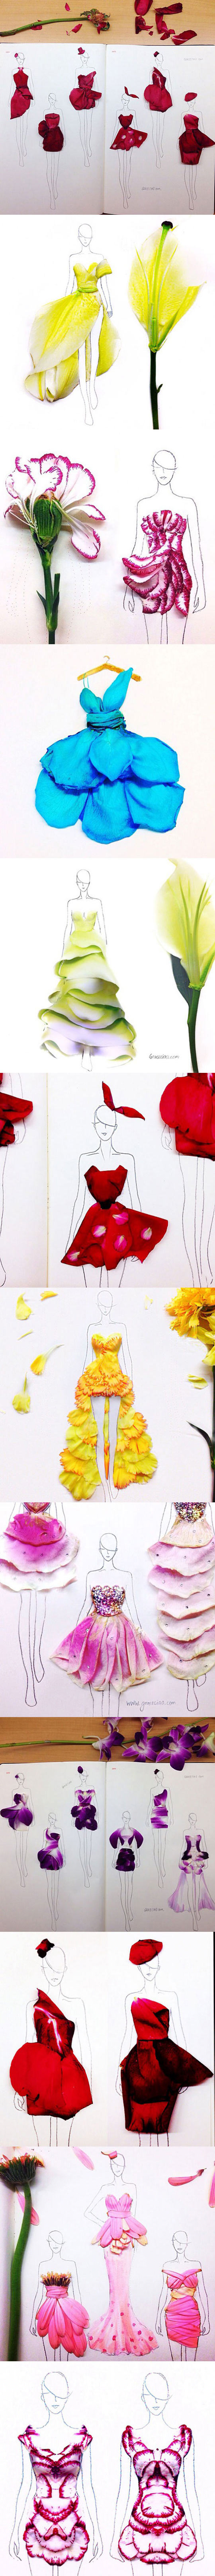 Real Flower Petals As Clothing